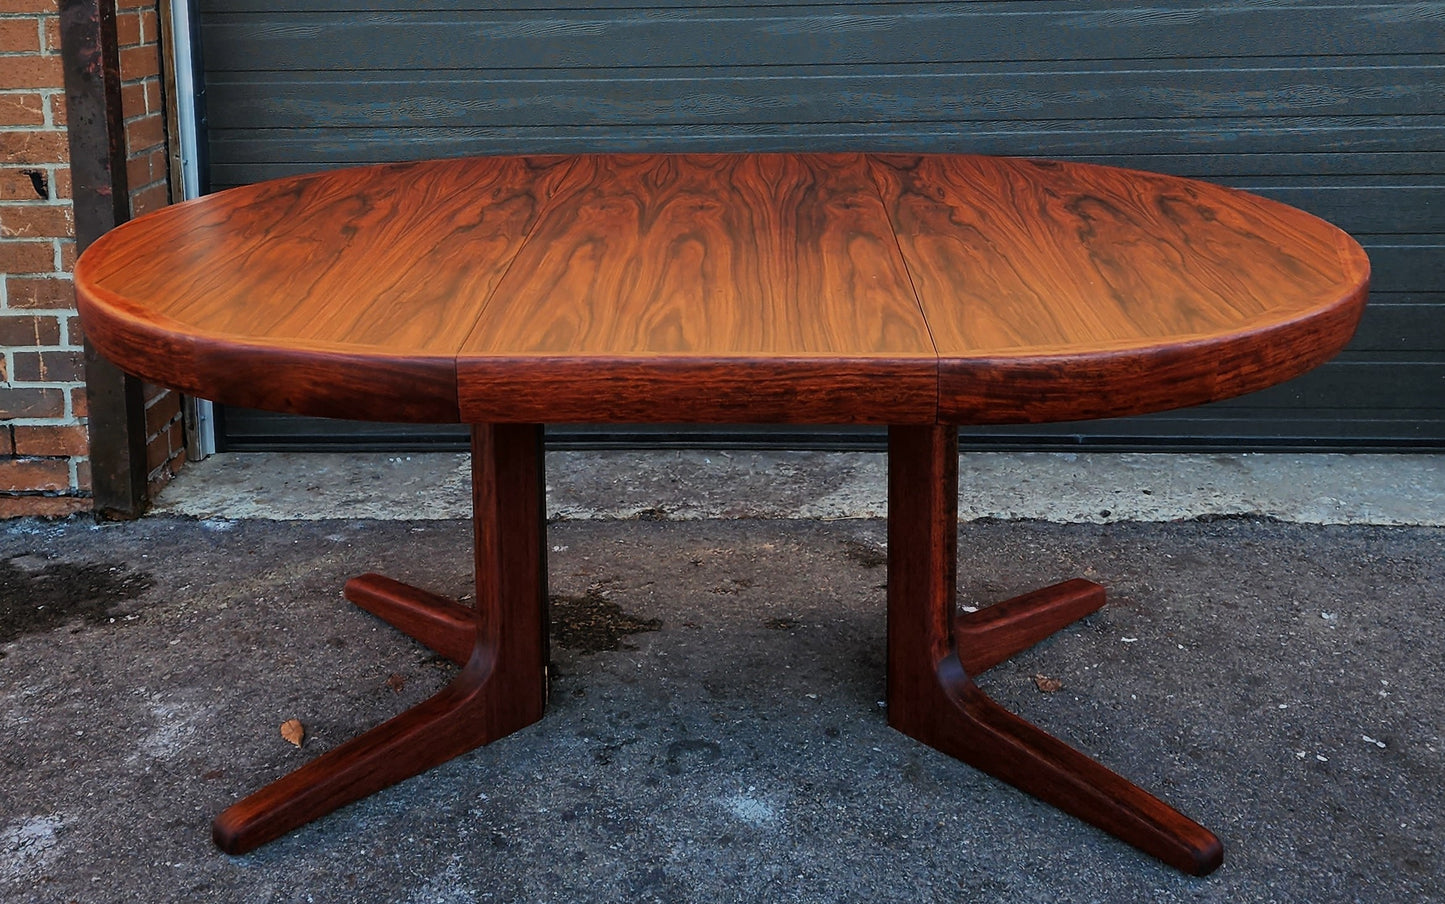 REFINISHED Danish Mid Century Modern Rosewood Table Round w 1 Leaf, 47"-66.5"